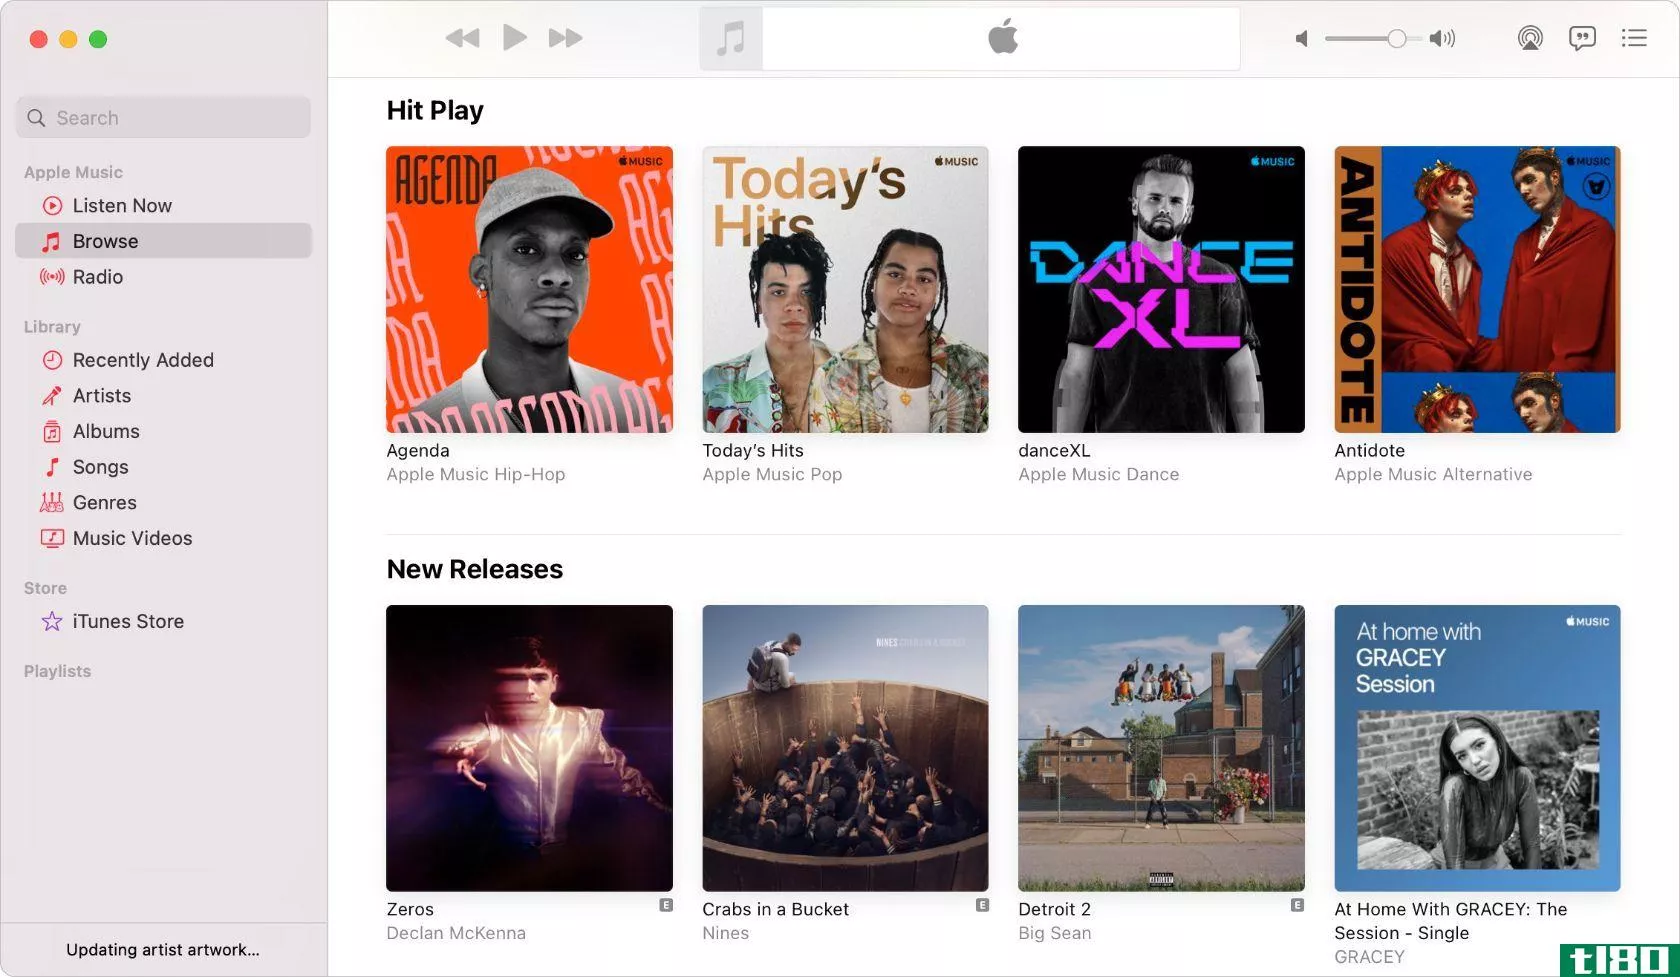 Apple Music browse page